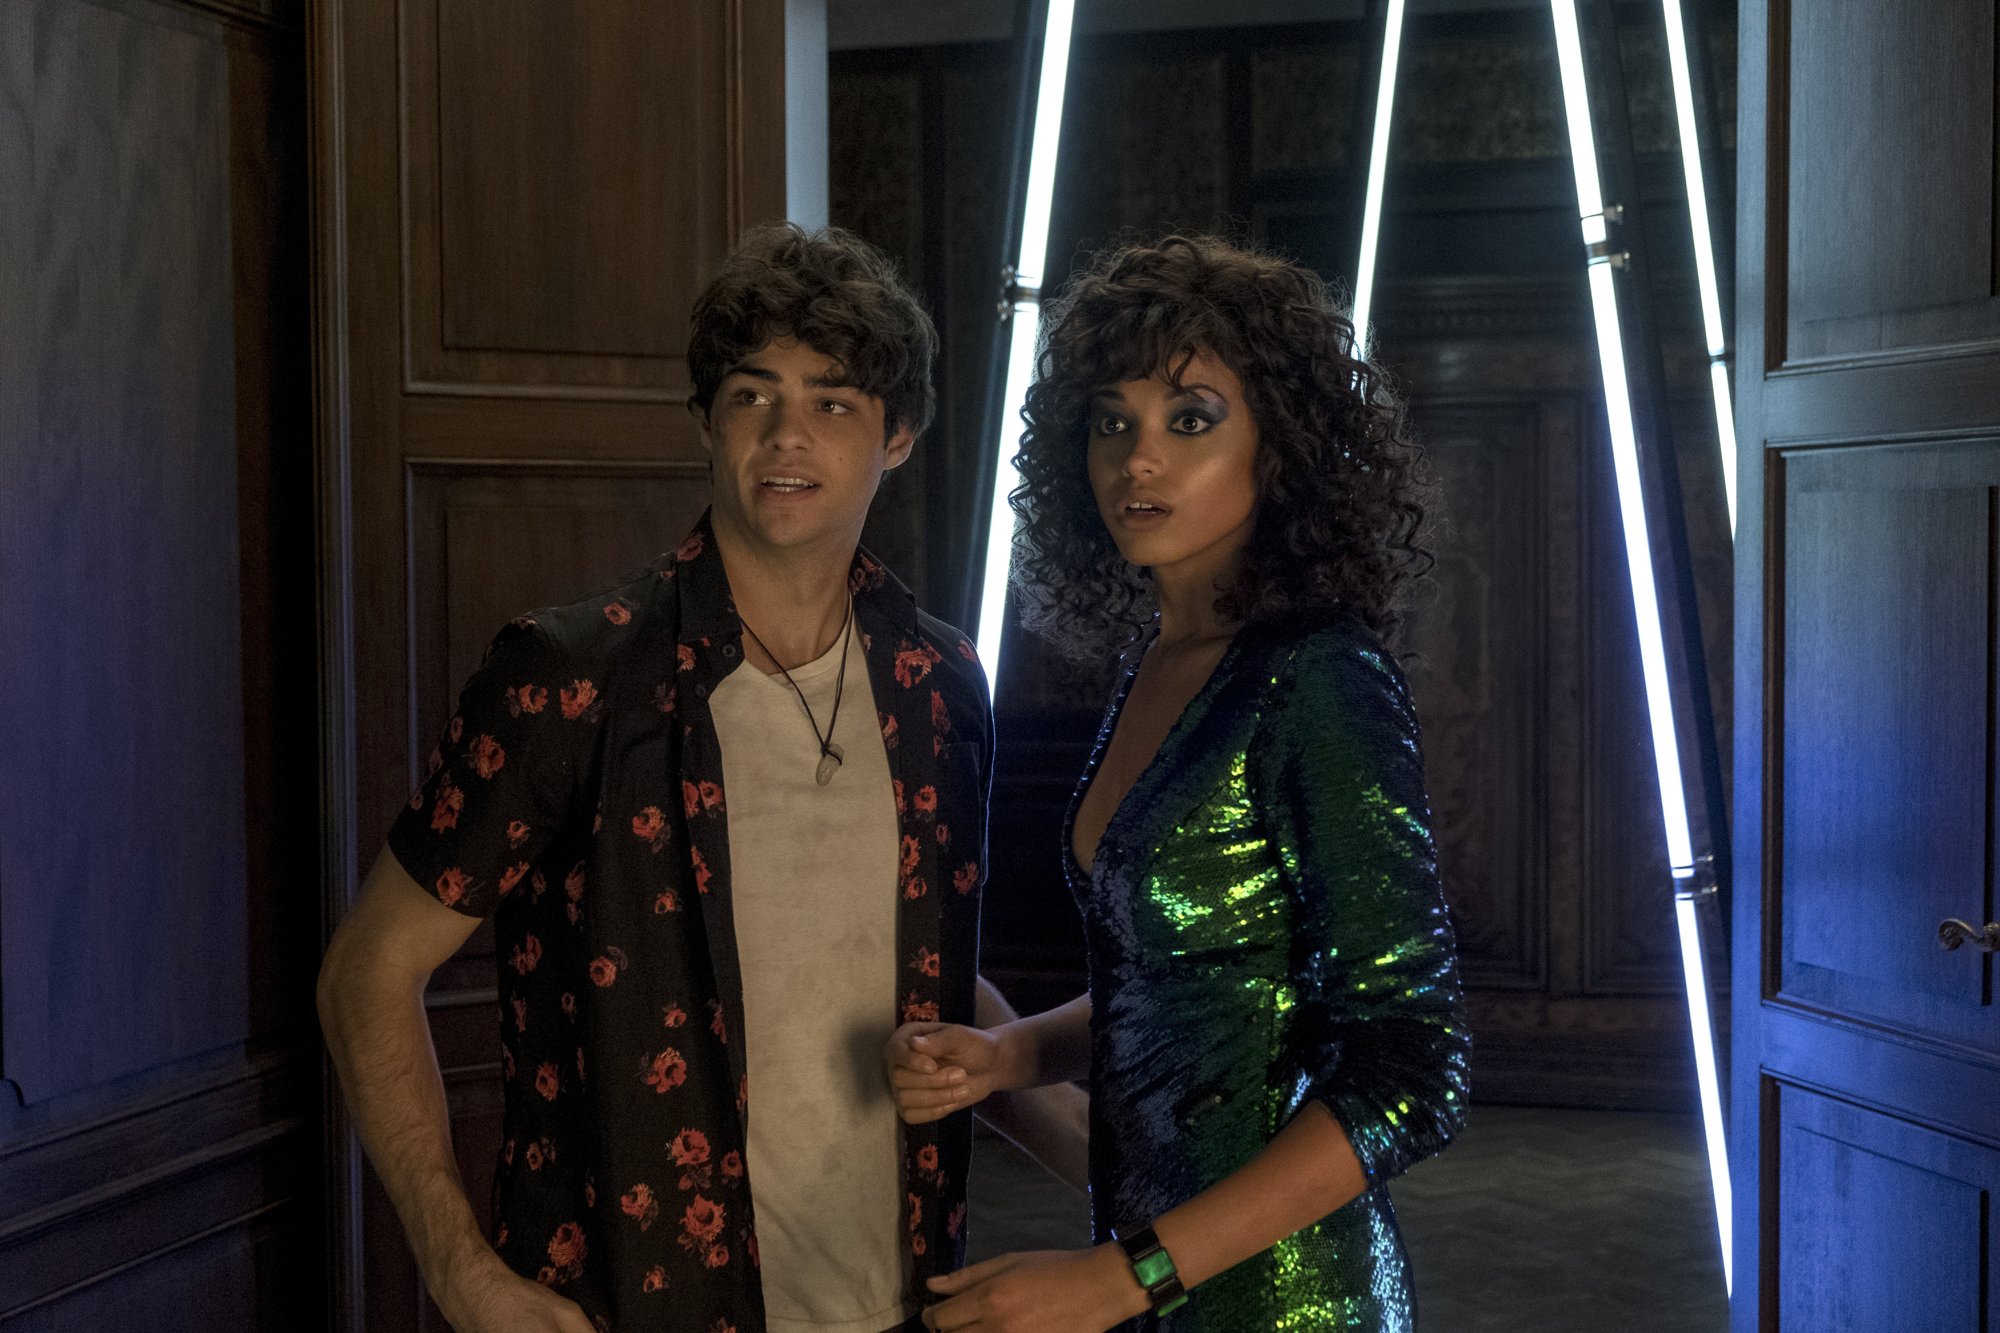 Noah Centineo stars as Langston and Ella Balinska stars as Jane Kano in Sony Pictures' Charlie's Angels (2019)